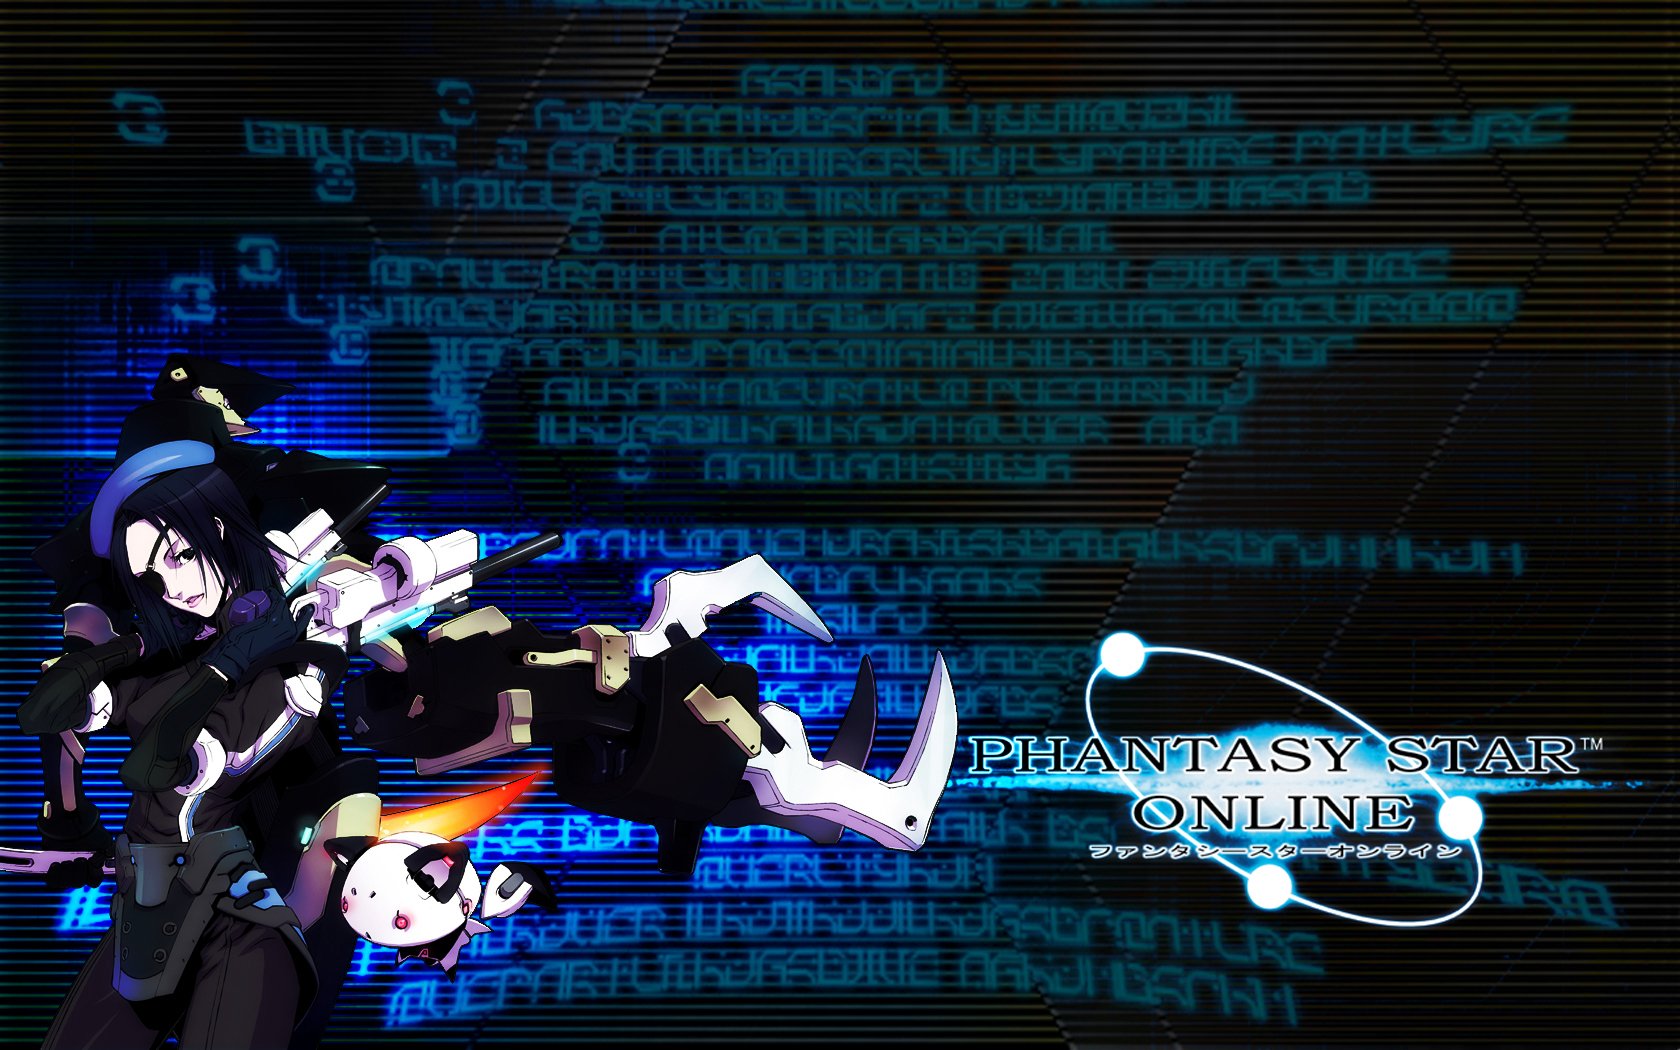 pso2 wallpaper,text,font,graphic design,graphics,animation